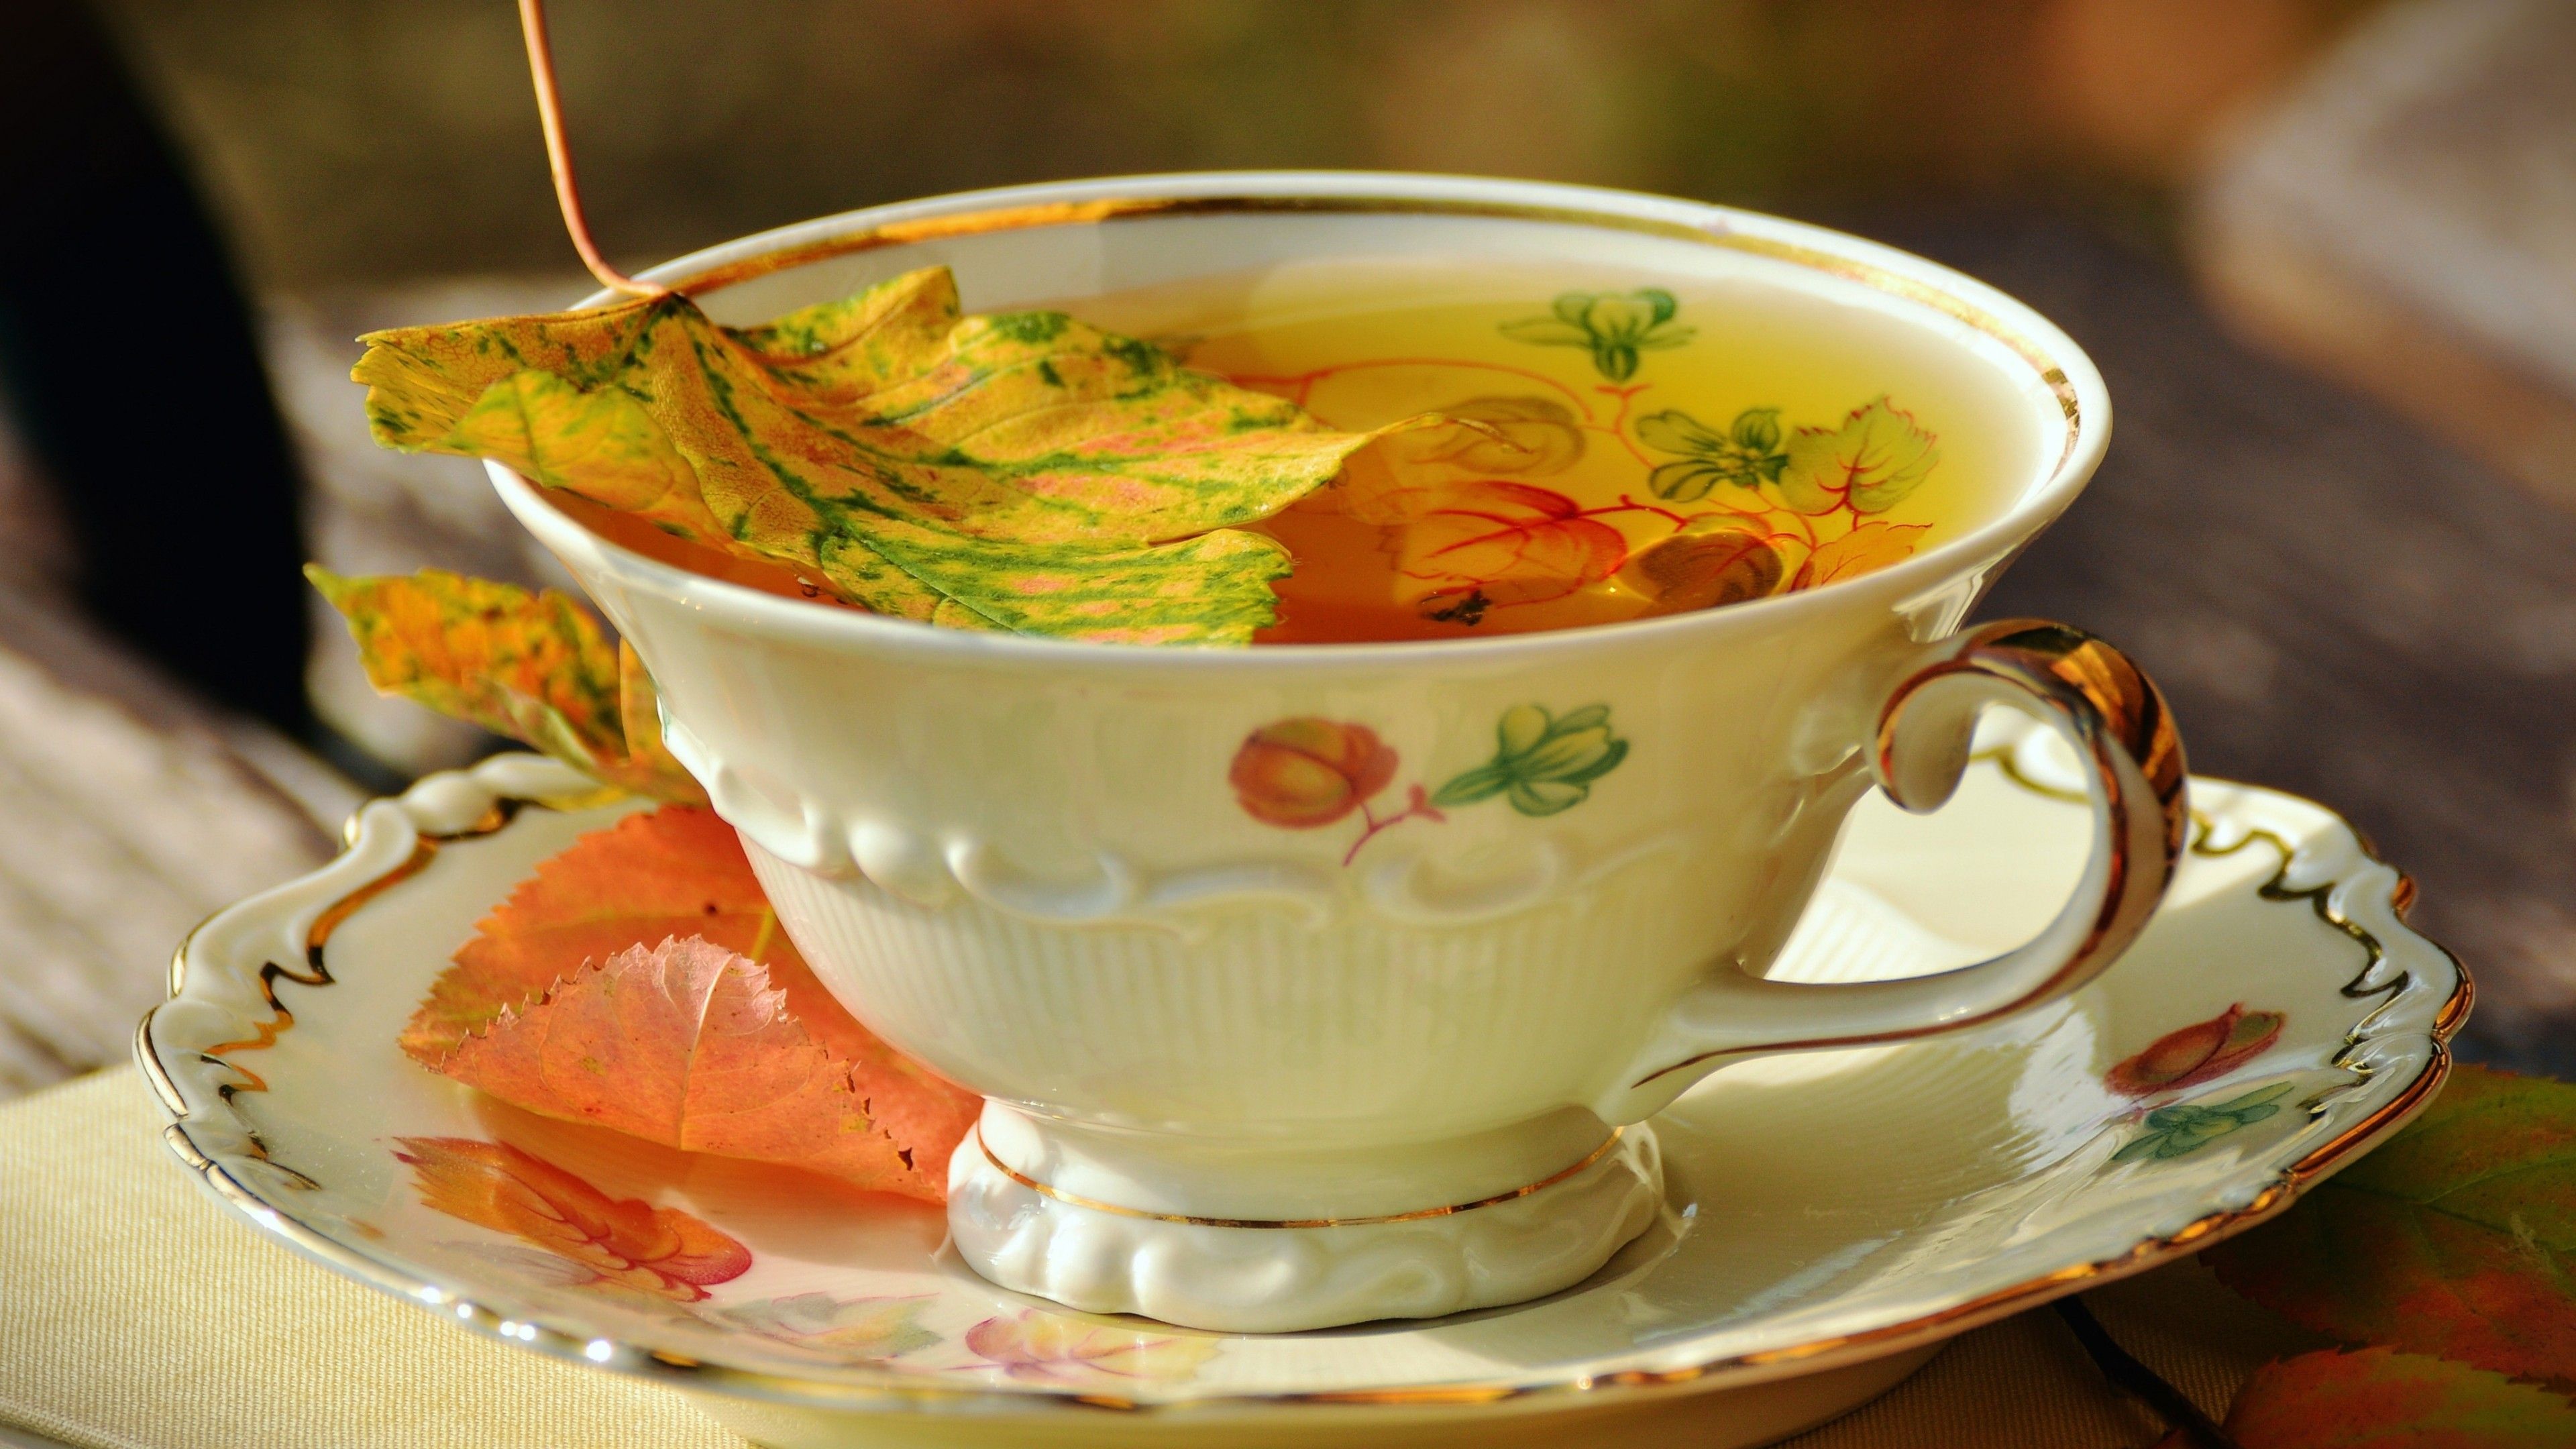 Download 3840x2160 Tea, Autumn, Cup, Leaves, Bokeh, Drinks Wallpaper for UHD TV